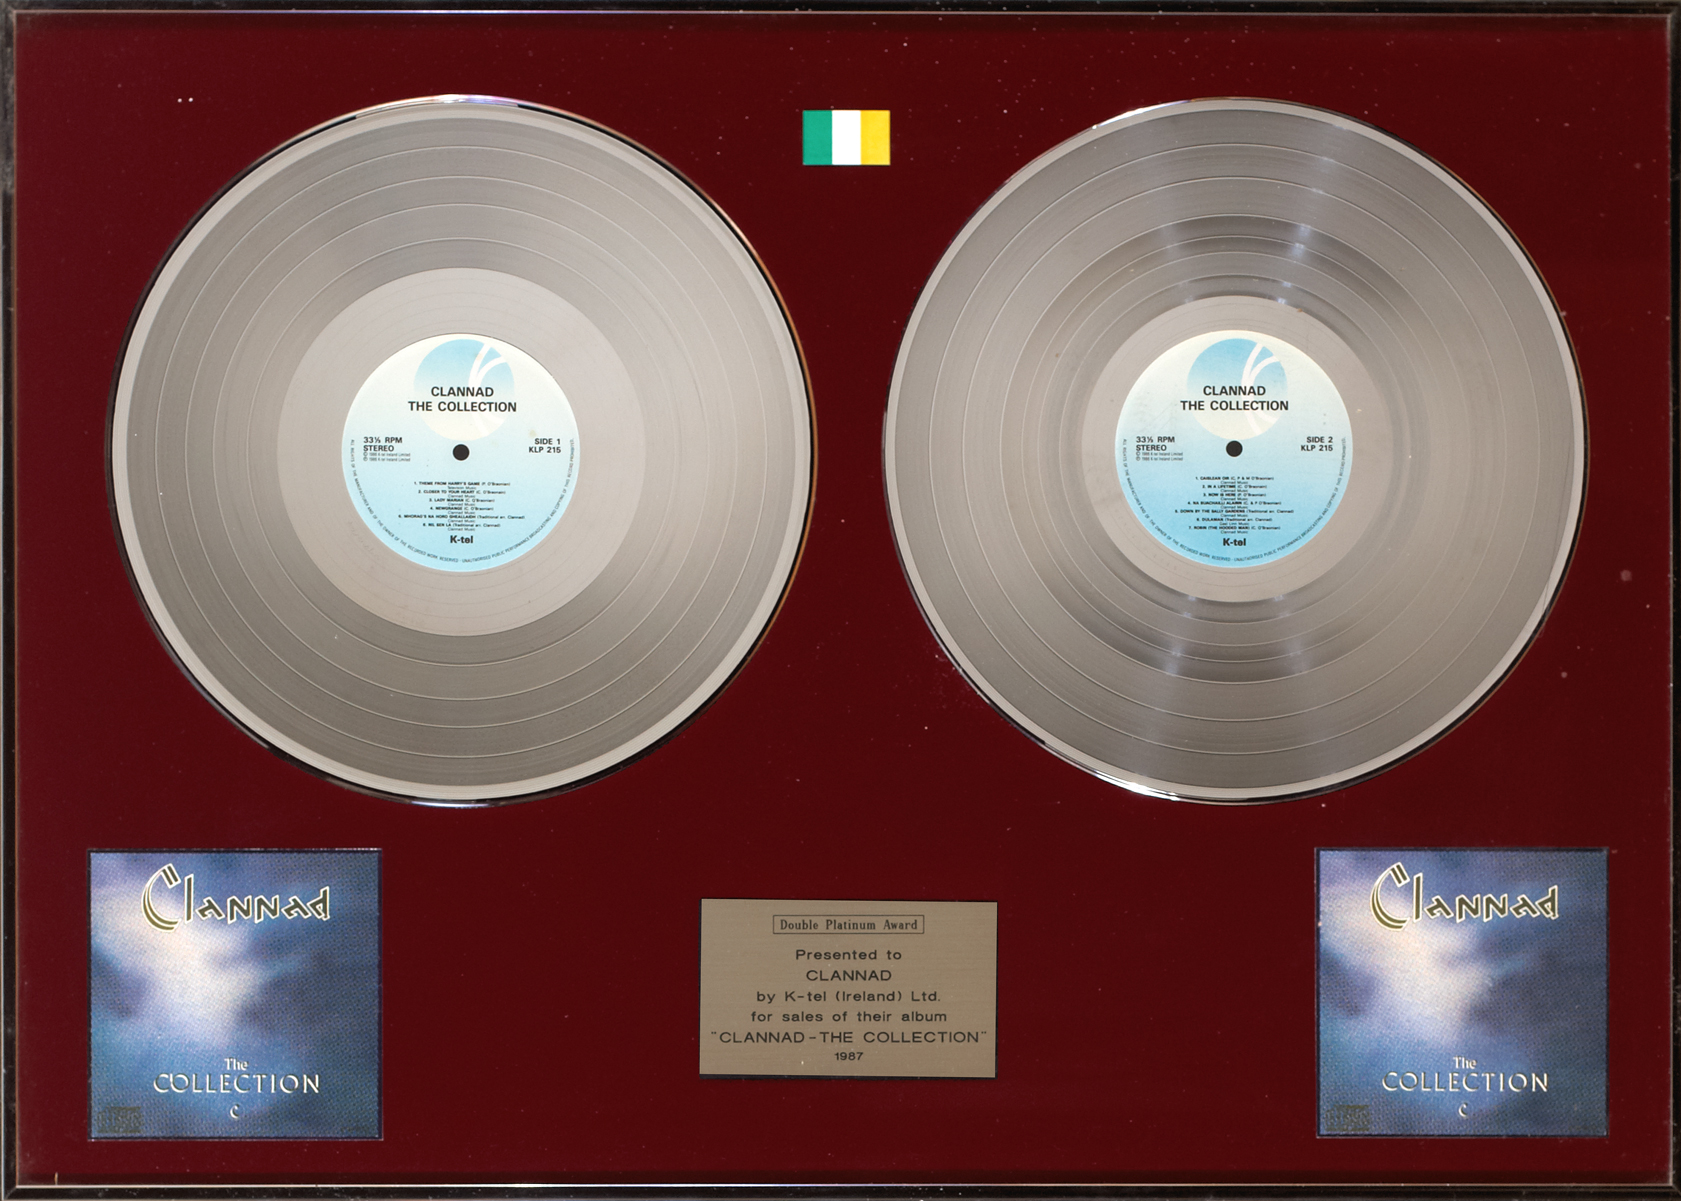 Clannad: Presentation double 'platinum' discs for their album 'The Collection' 1987 at Whyte's Auctions